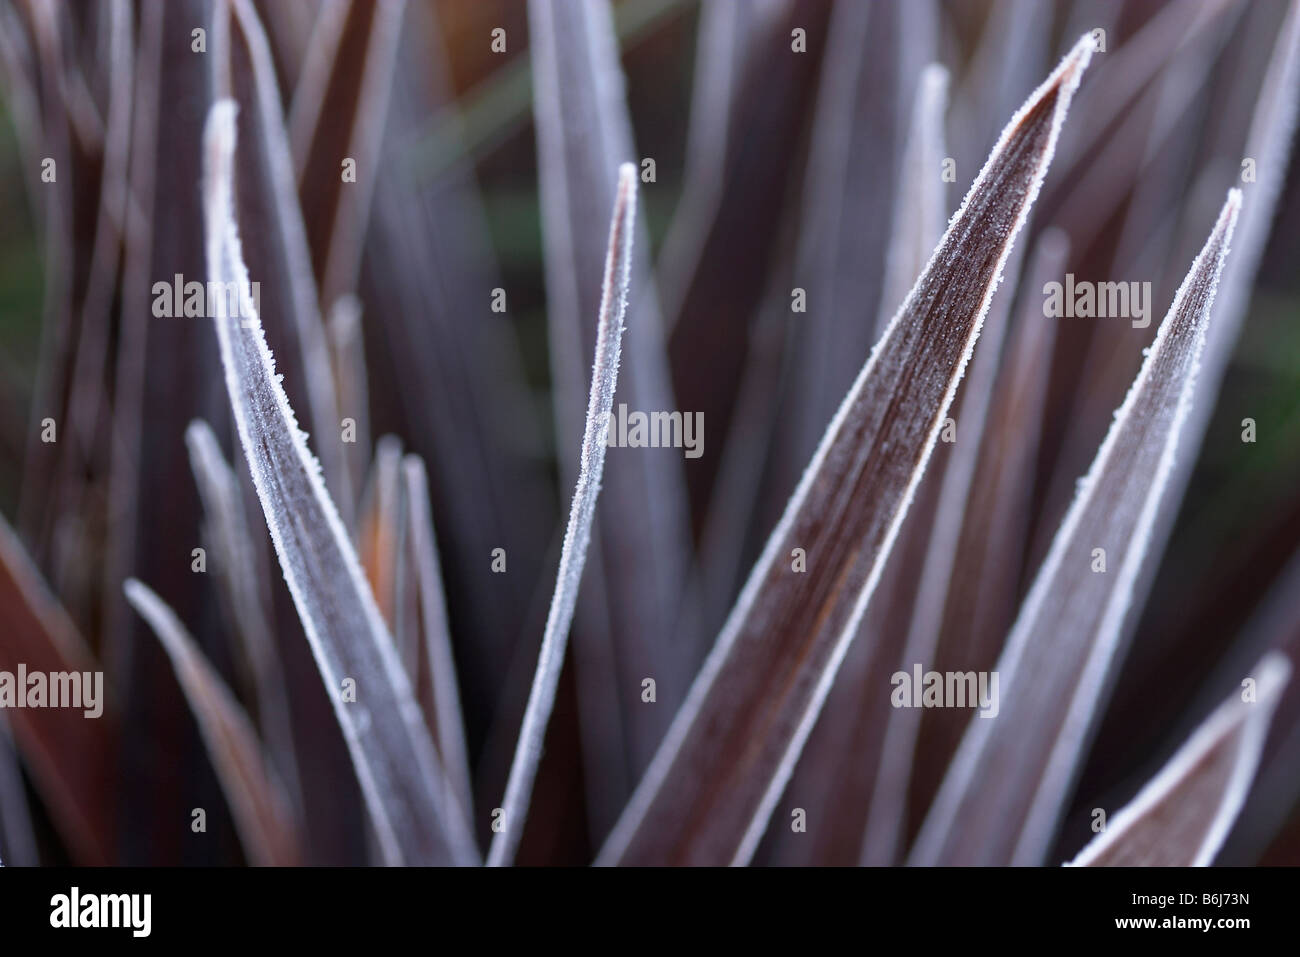 frosted or frozen red star cordyline australis Stock Photo